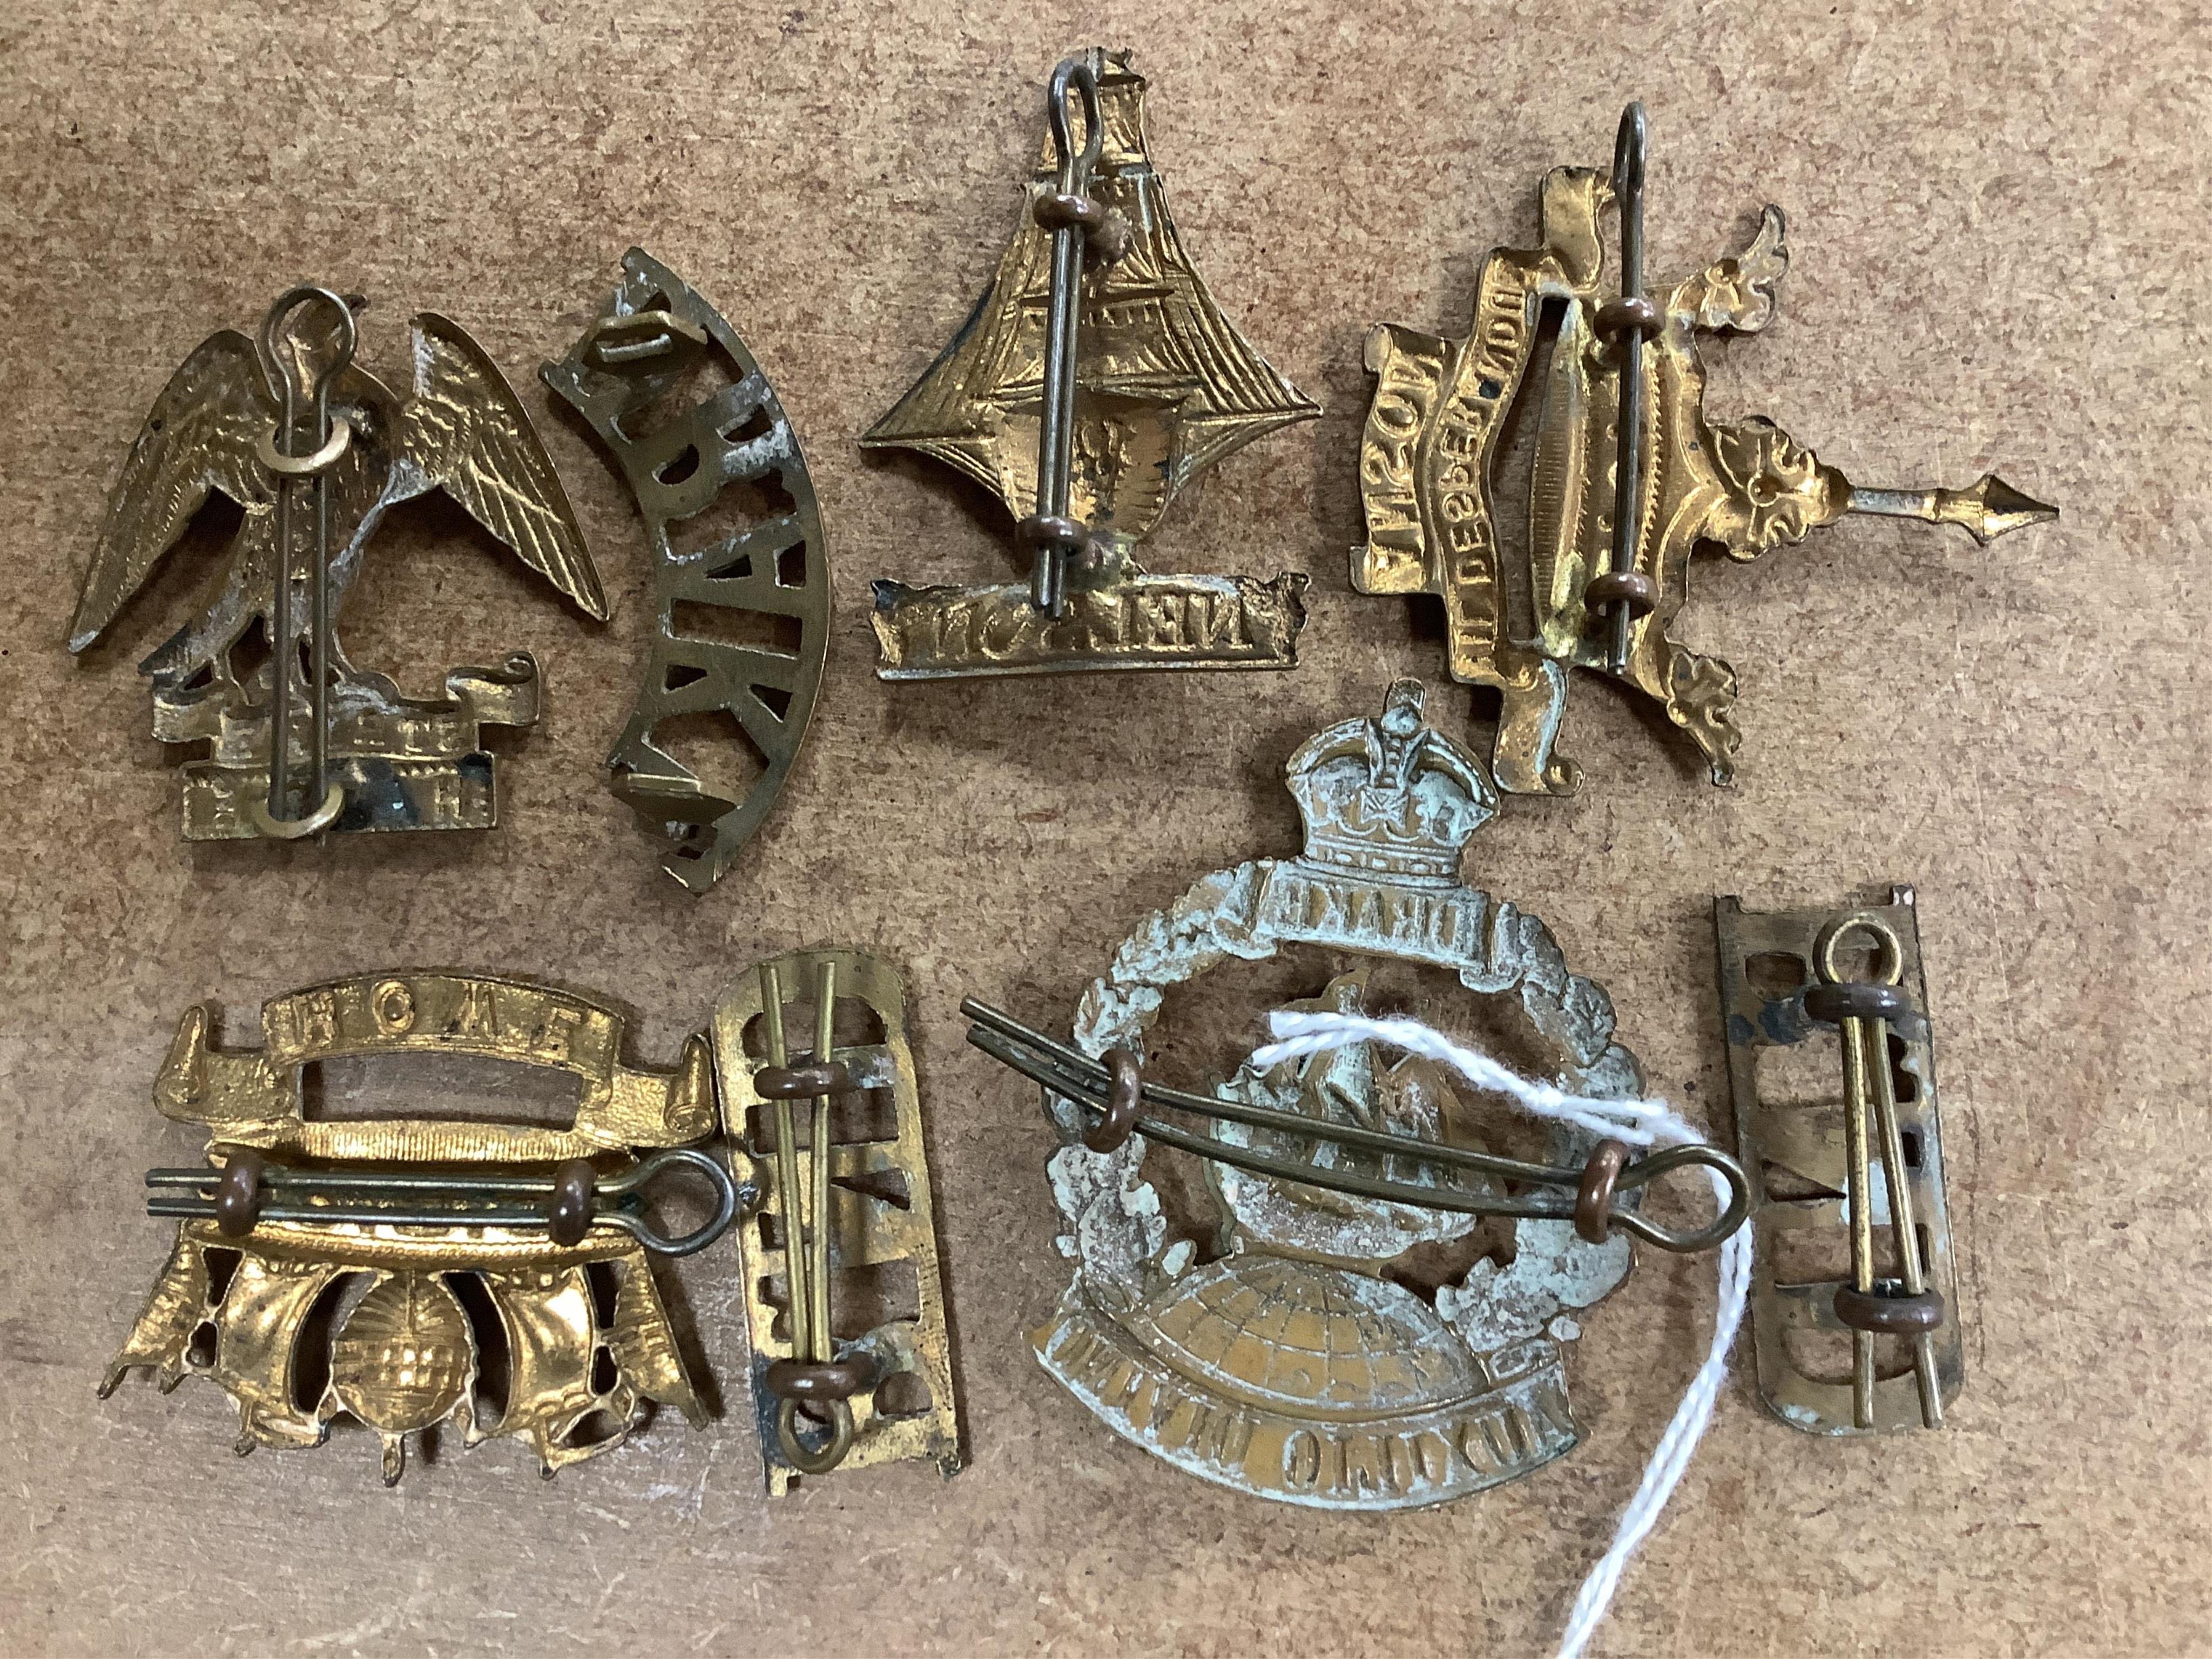 Five Royal Navy First World War brass cap badges; the Nelson, Hawke, Anson and Howe Battalions, together with three shoulder titles. Condition - fair, some possible restrikes.